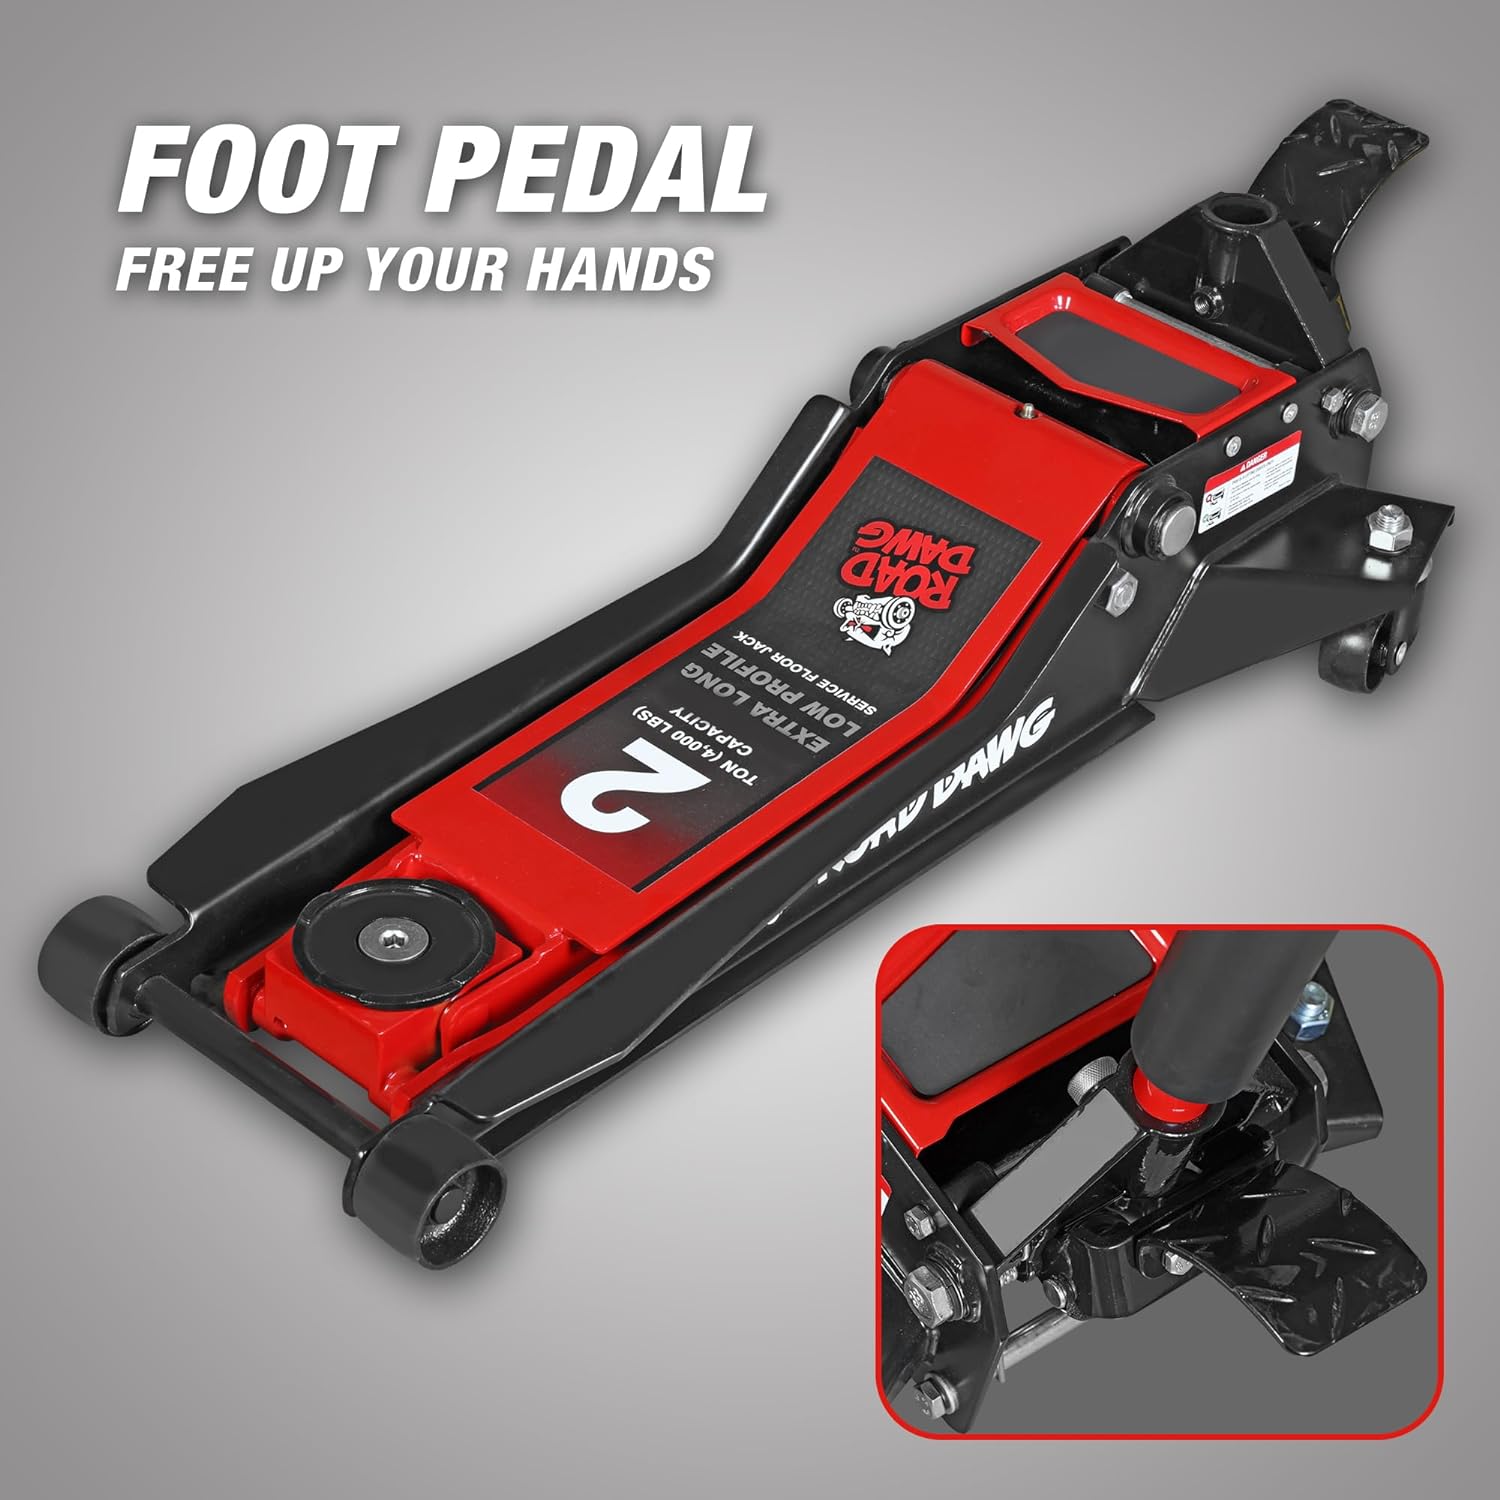 big-red-2-ton-ultra-low-profile-floor-jack-with-rapid-pump-and-foot-pedal